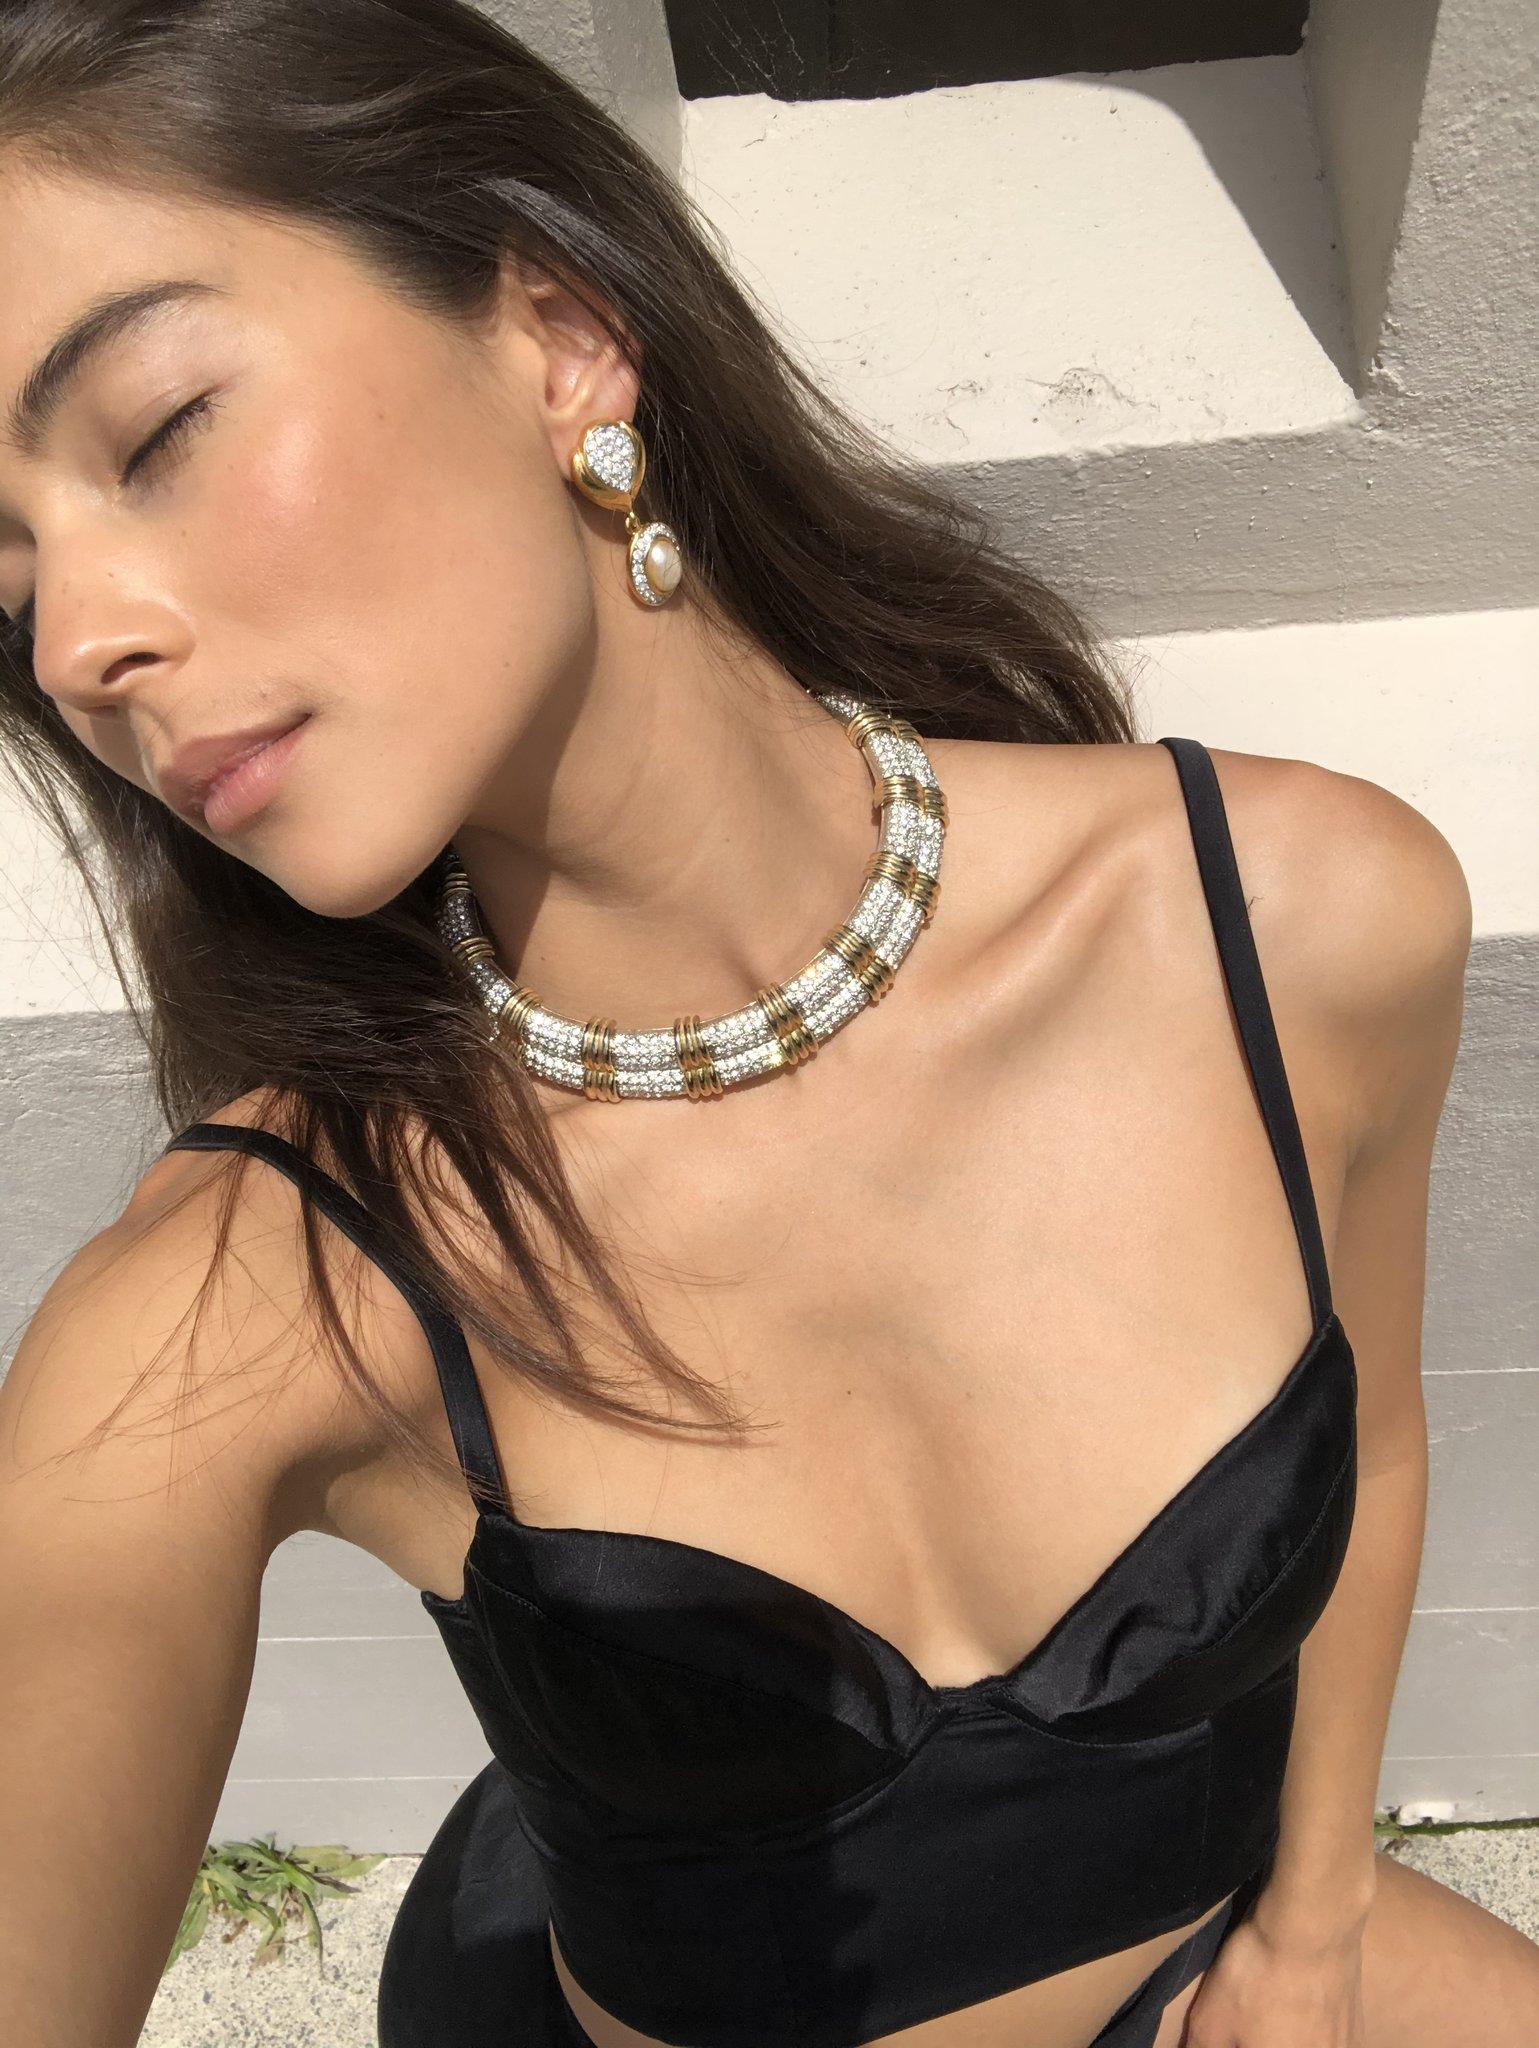 This incredible choker is the definition of a statement piece, with textured gold and silver tone, crystals and a hinged clasp. Big and bold, it's 90s vintage at its finest.  Wear with a simple LBD or a sharp tuxedo suit, sans shirt, to ring in the